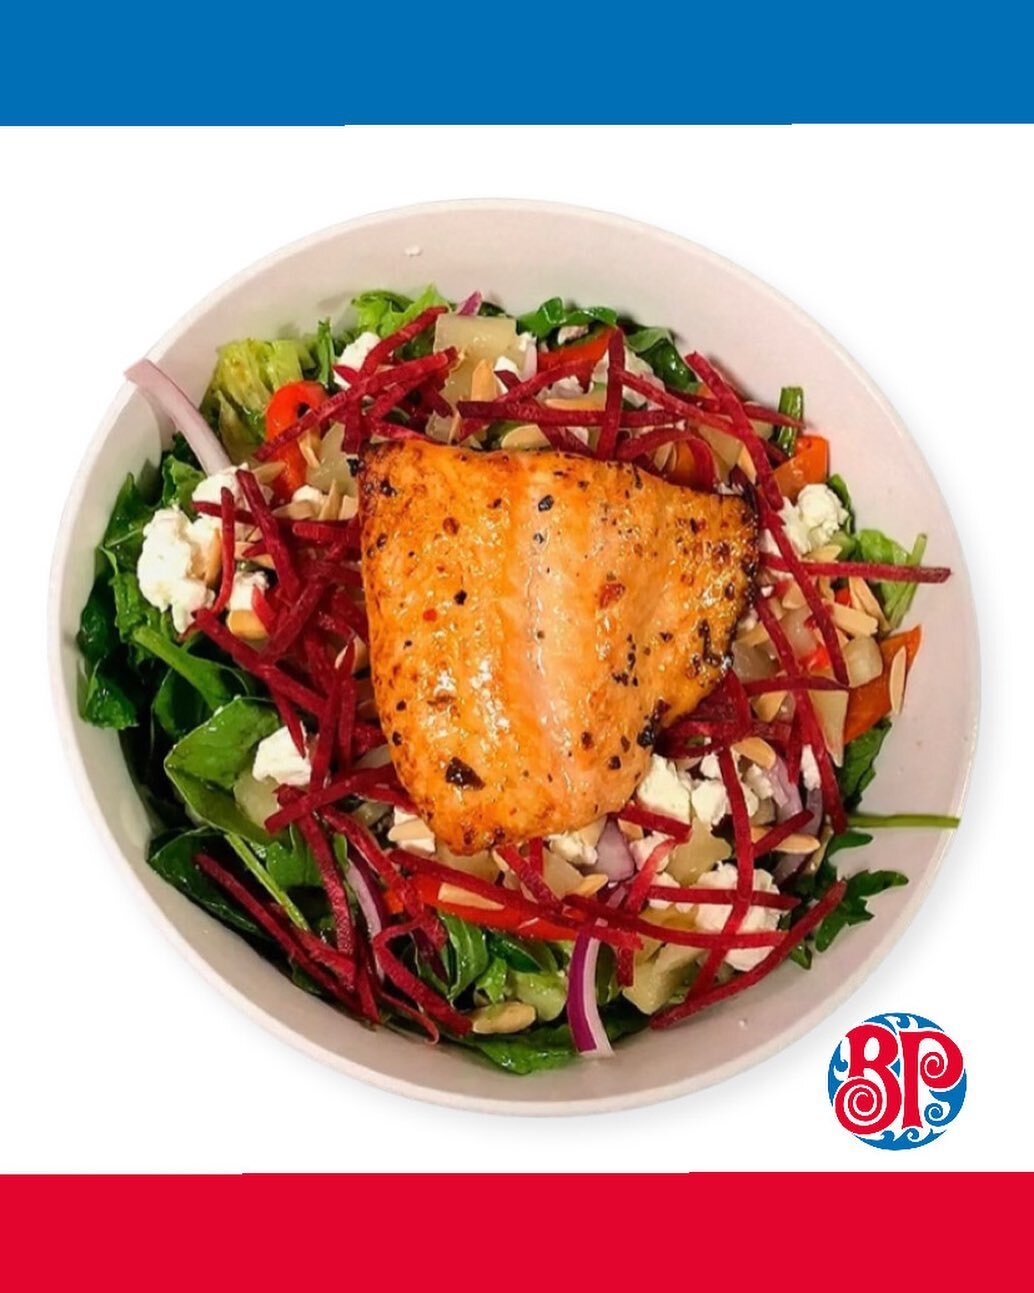 For the times you want something on the lighter side! 🥗

Pineapple, Beet &amp; Goat Cheese salad with a Salmon Filet to satisfy that hearty craving in a healthier way! 

#goatcheesesalad #healtyfood #salad #foodofinstagram #summermenu  #summbervibes